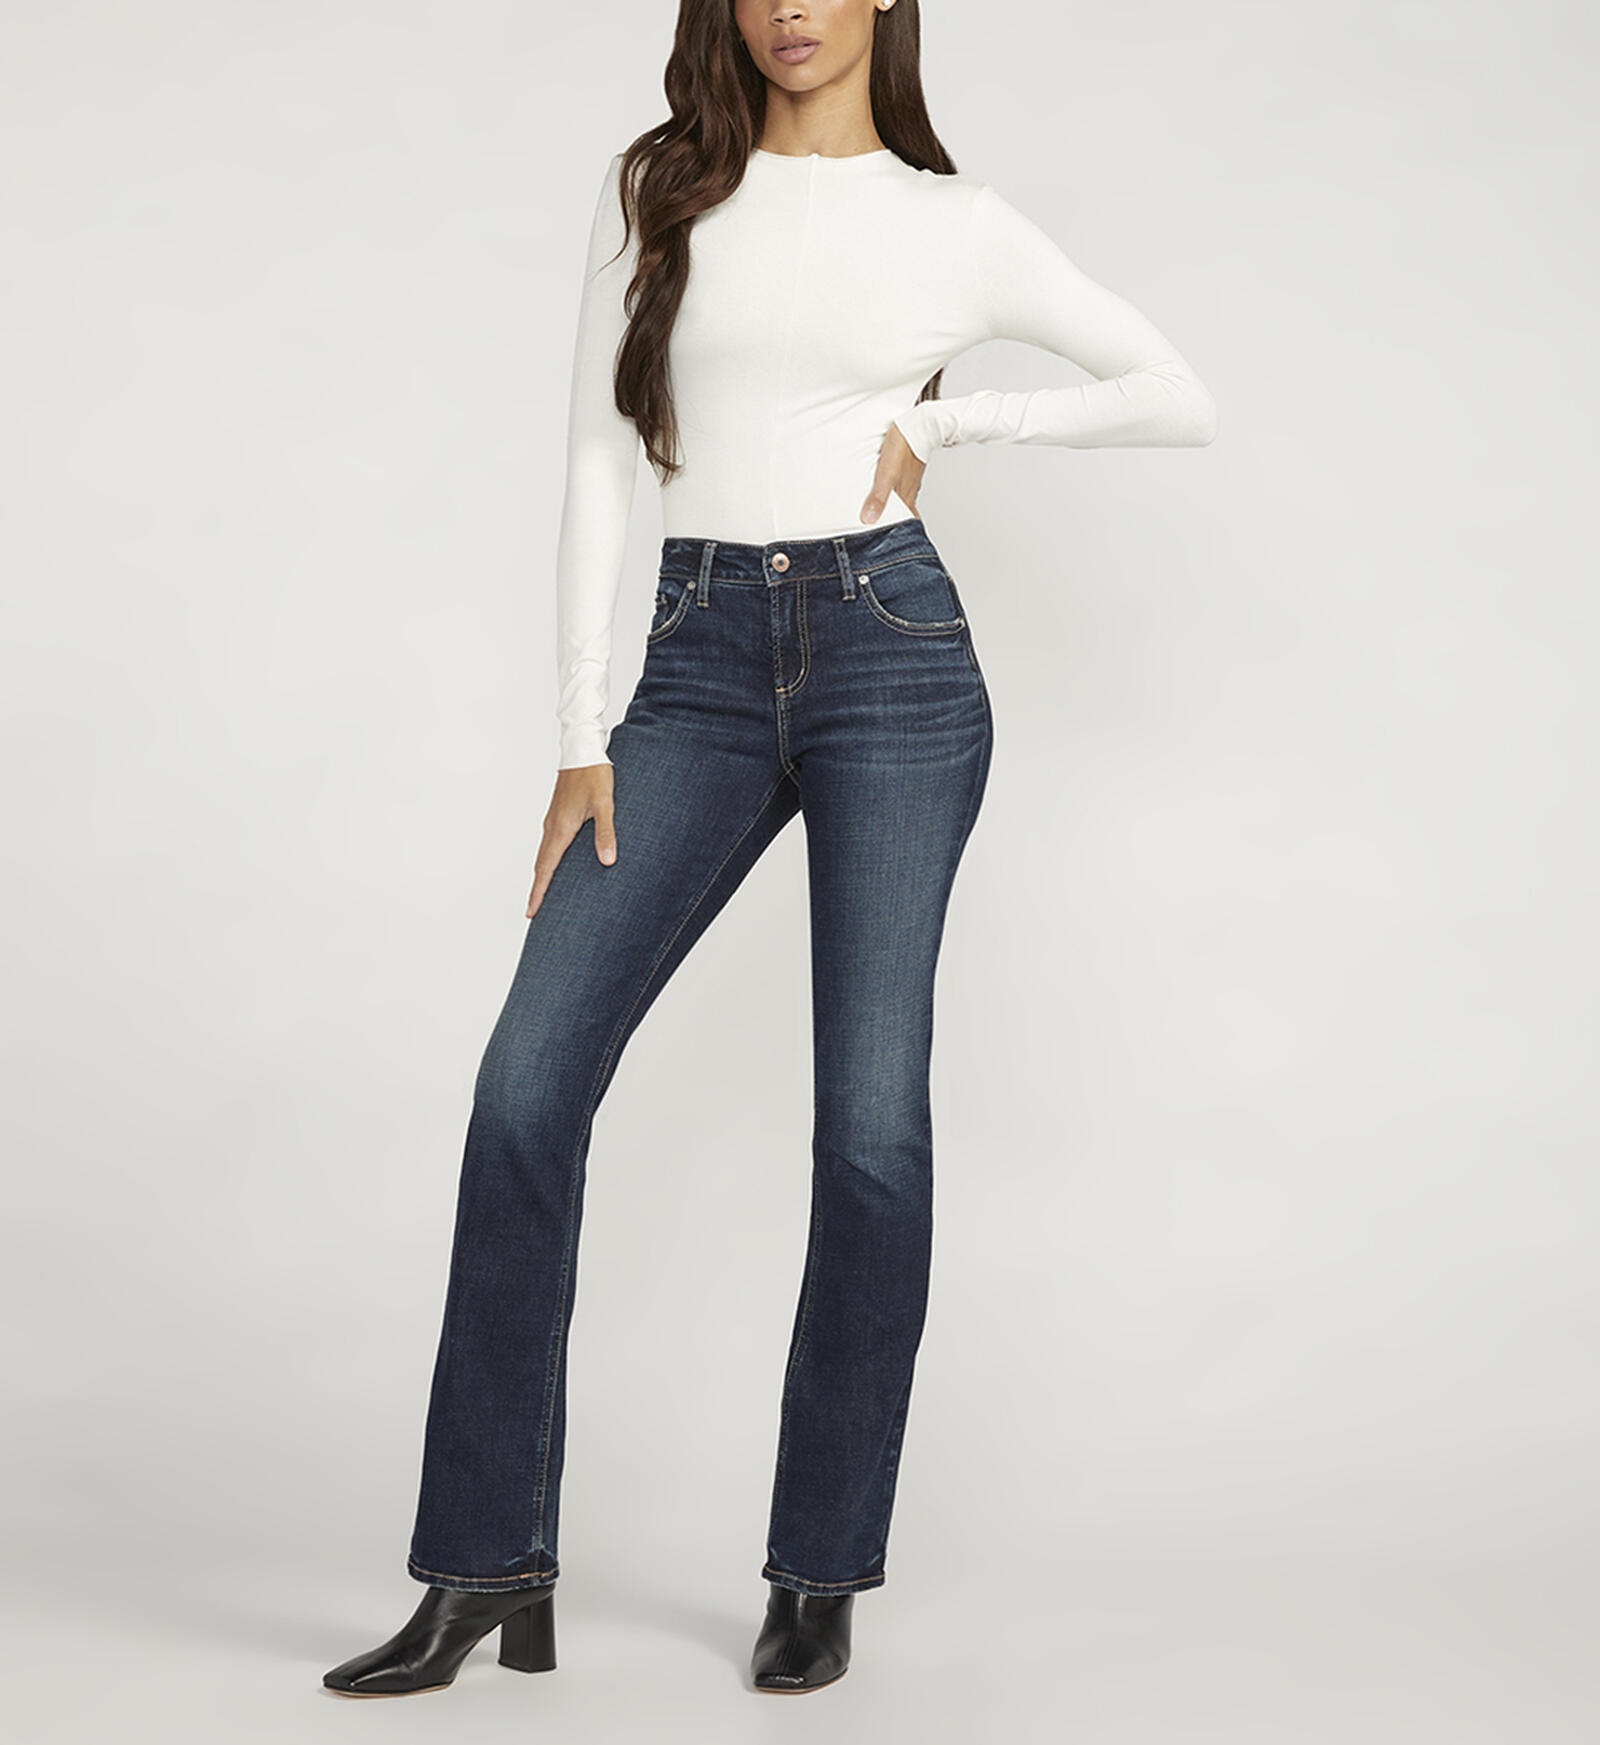 Buy Elyse Mid Rise Slim Bootcut Jeans for CAD 108.00